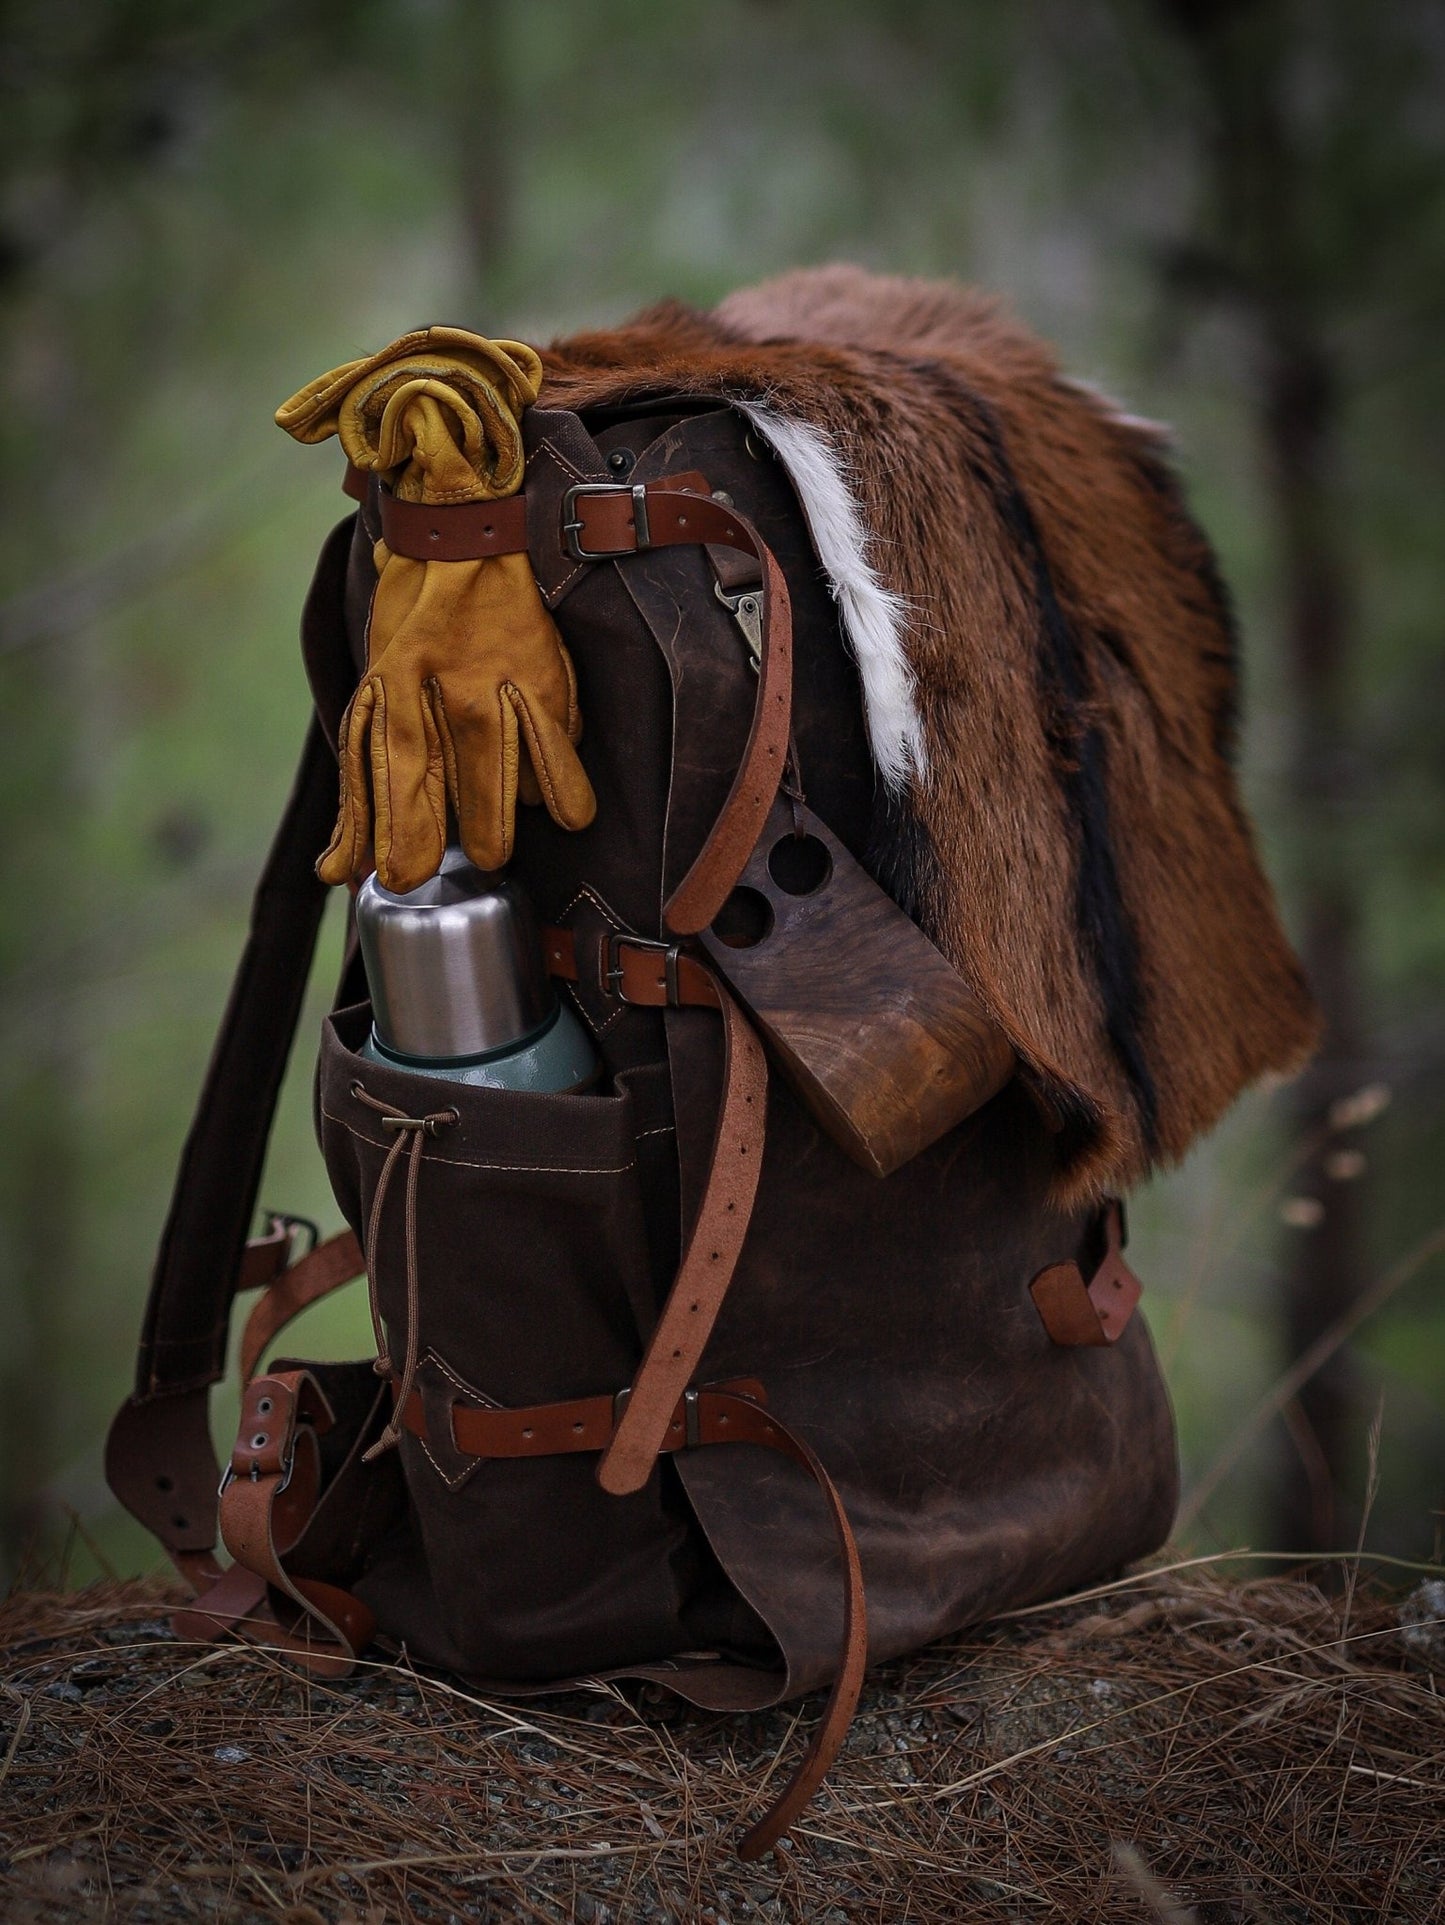 Goat Fur , Canvas and Leather Bag | Bushcraft | Camping | Outdoor | Hiking | Handmade Backpack l  | 30,40,50 Litres option bushcraft - camping - hiking backpack 99percenthandmade   